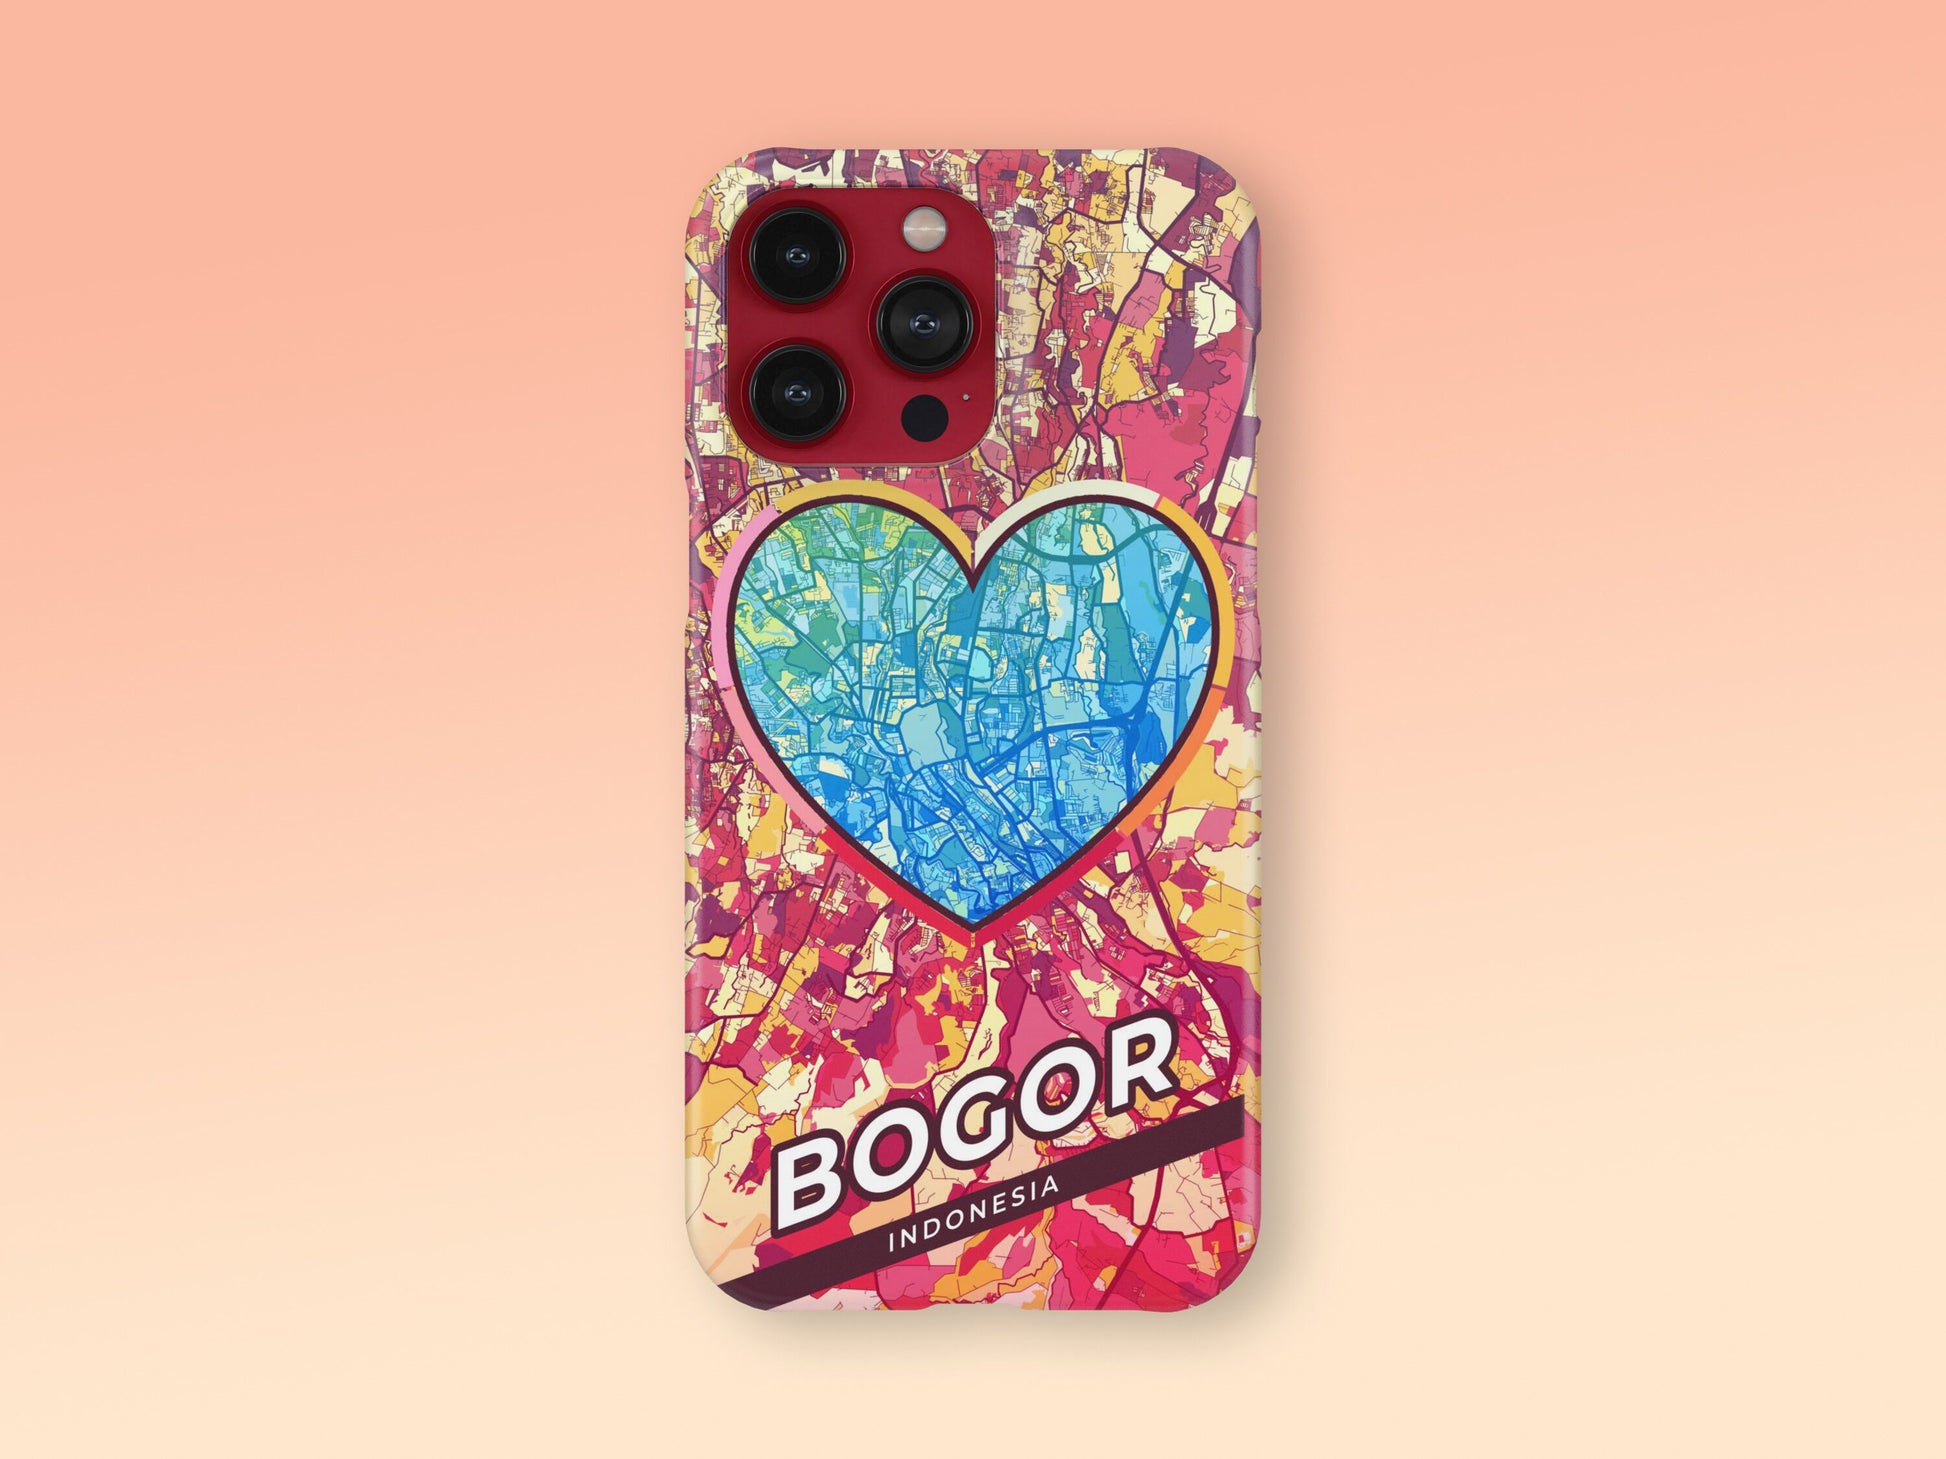 Bogor Indonesia slim phone case with colorful icon. Birthday, wedding or housewarming gift. Couple match cases. 2